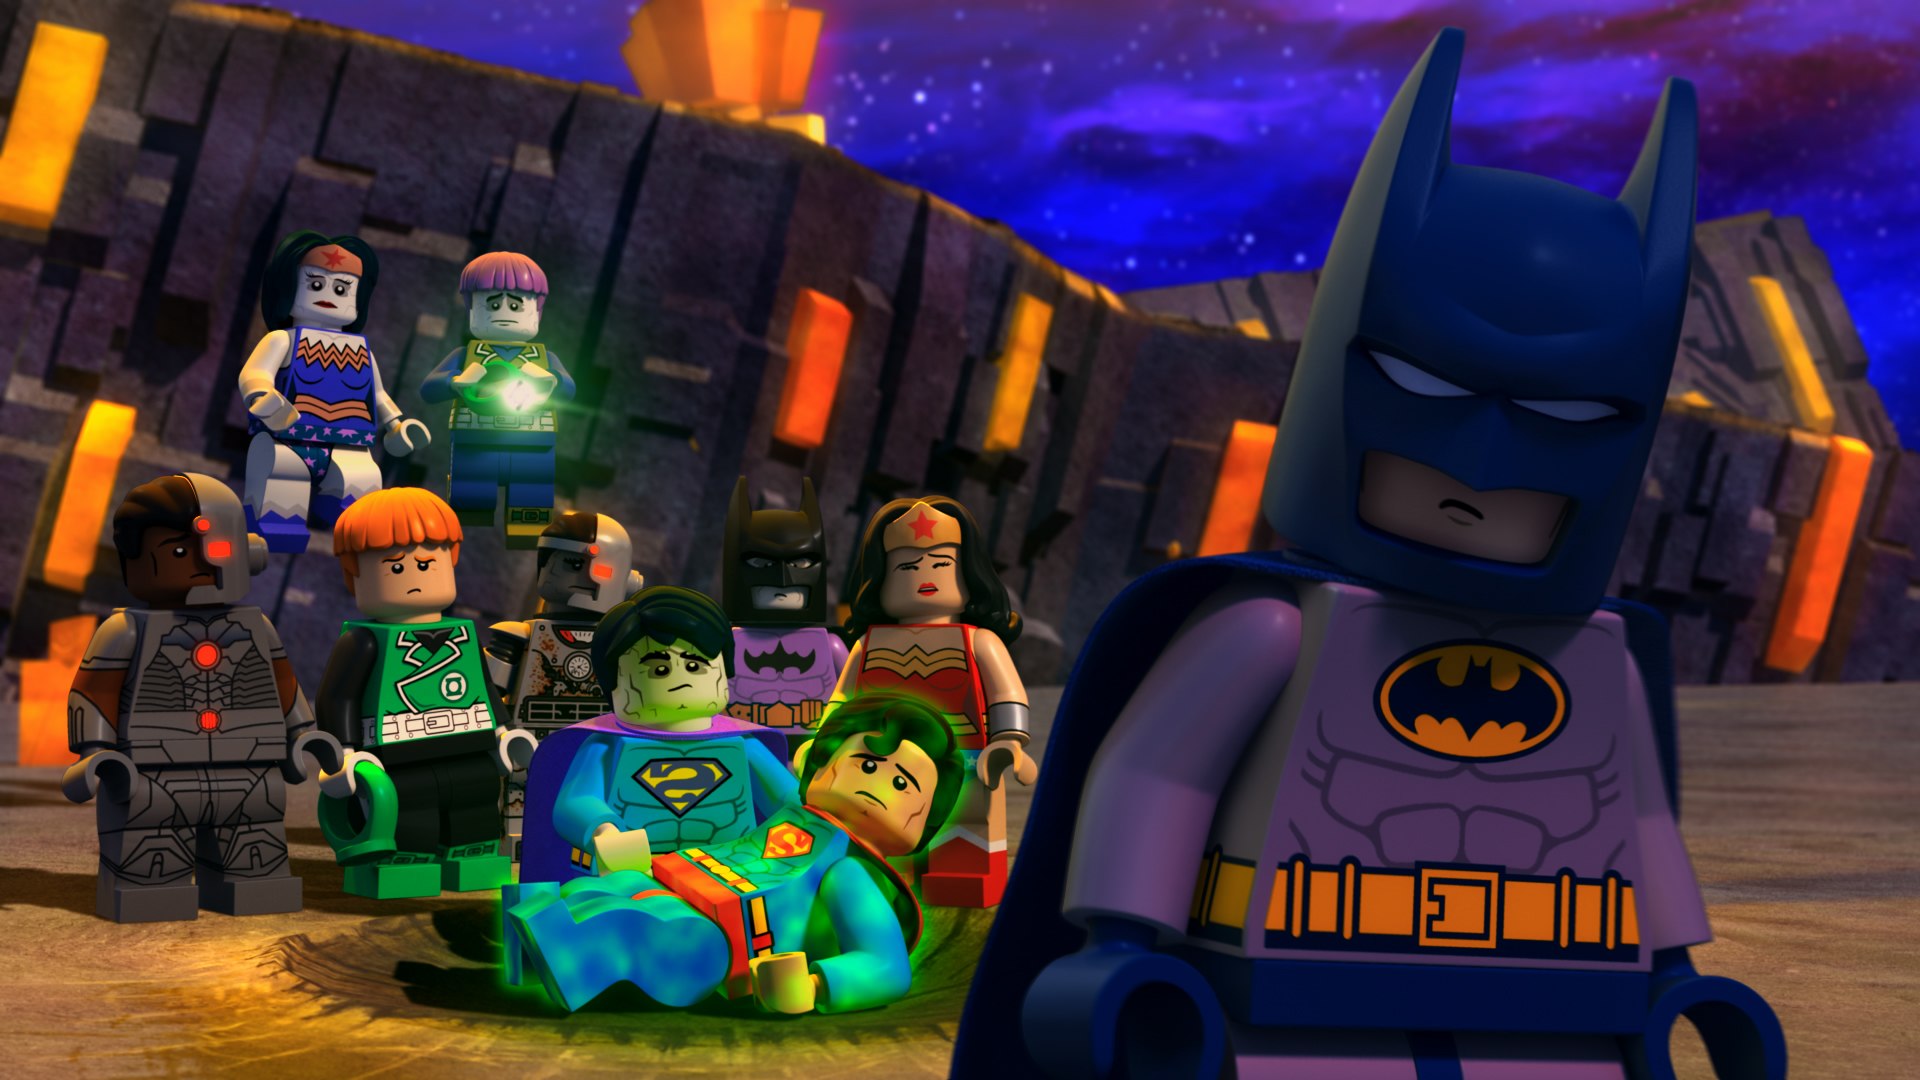 Did Lego Justice League just appear in the 'Lego Batman' trailer?